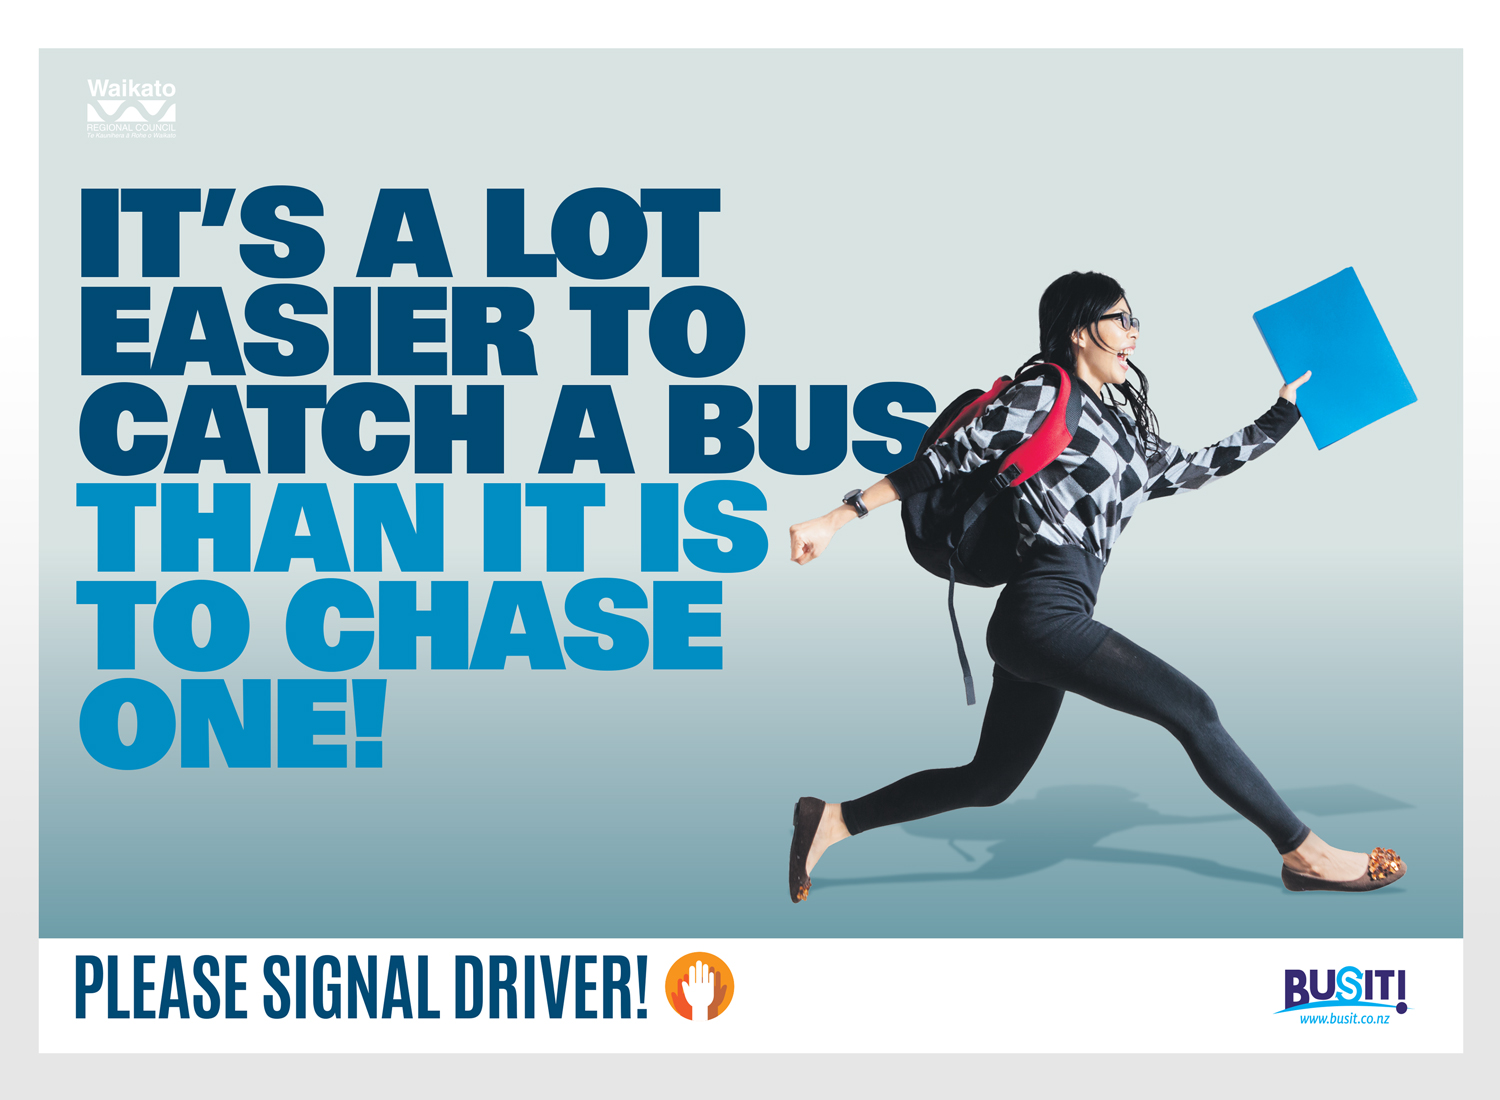  Campaign to encourage bus users to signal the driver at stops 